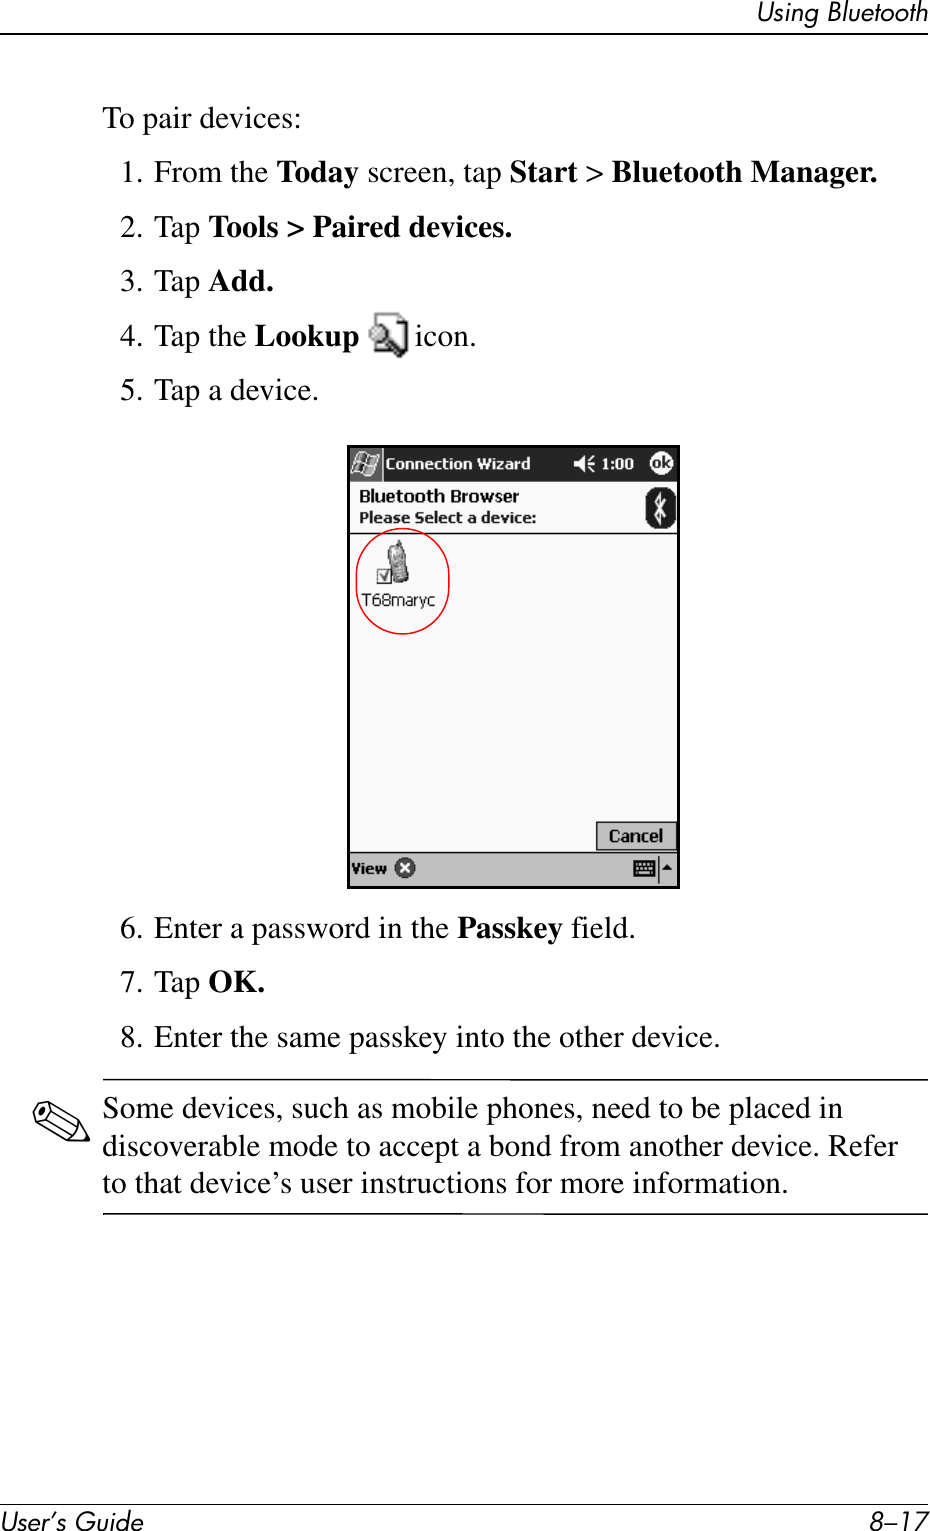 Using BluetoothUser’s Guide 8–17To pair devices:1. From the Today screen, tap Start &gt; Bluetooth Manager.2. Tap Tools &gt; Paired devices.3. Tap Add.4. Tap the Lookup  icon.5. Tap a device.6. Enter a password in the Passkey field.7. Tap OK.8. Enter the same passkey into the other device.✎Some devices, such as mobile phones, need to be placed in discoverable mode to accept a bond from another device. Refer to that device’s user instructions for more information.